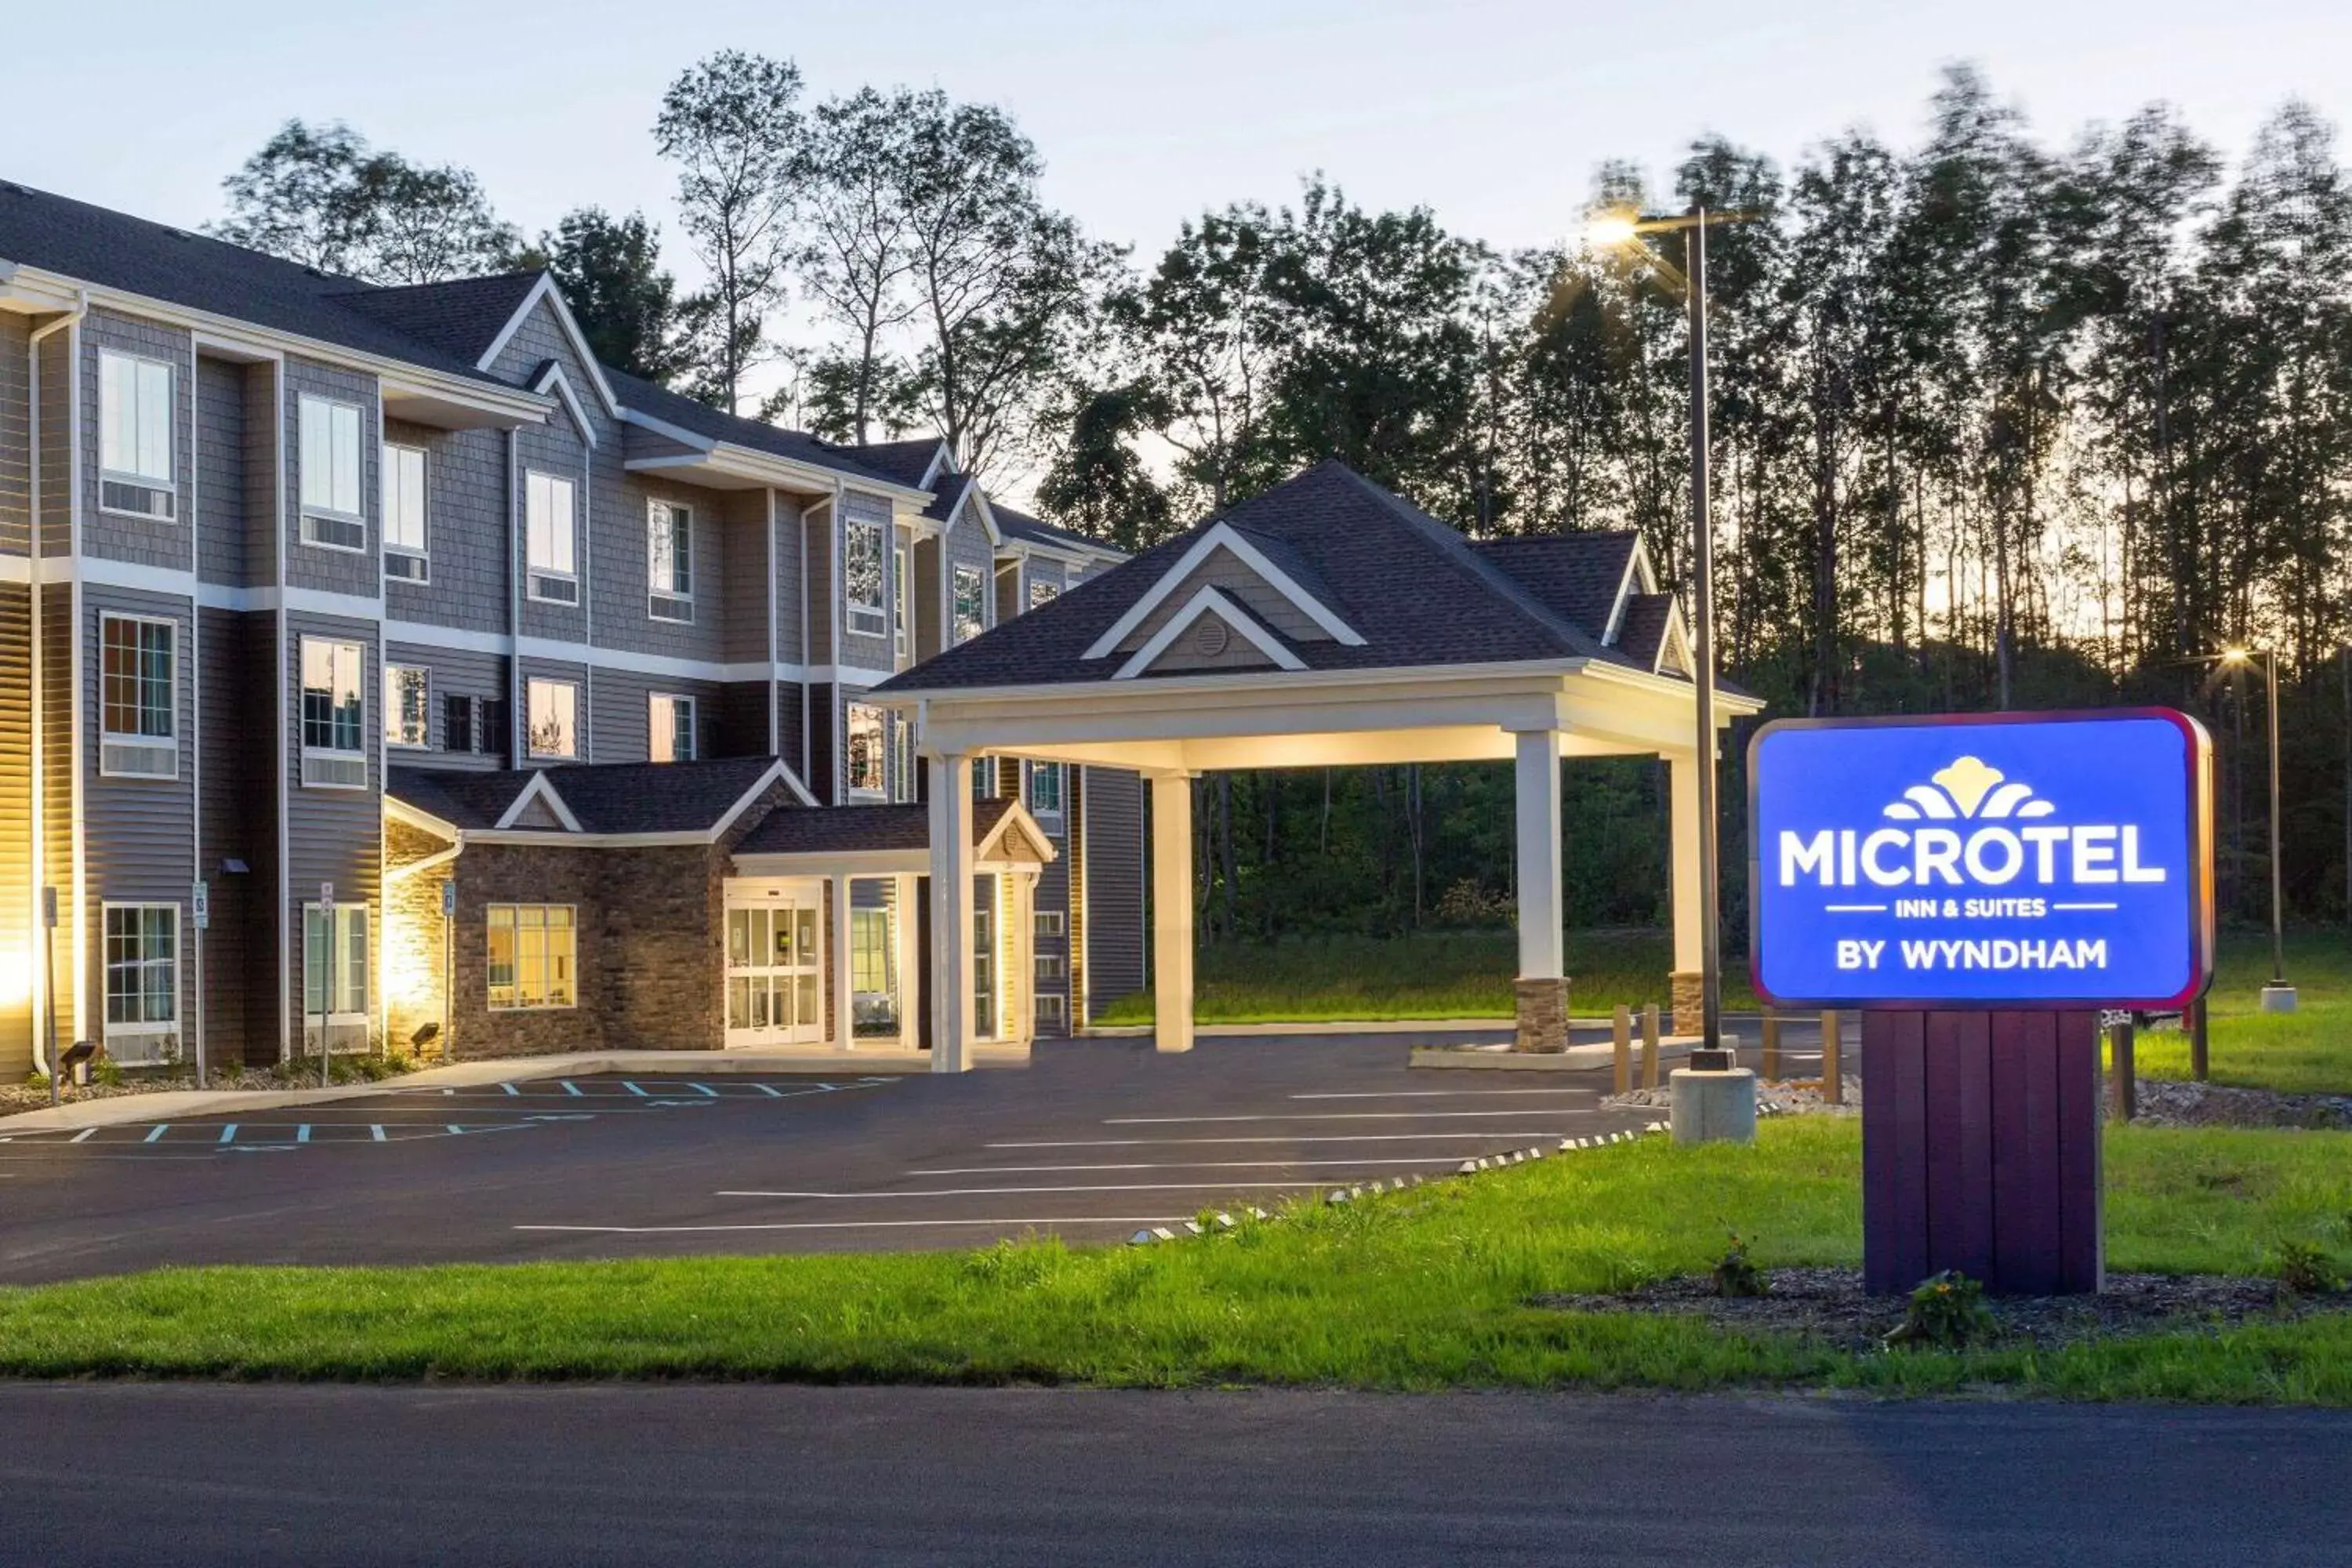 Property Building in Microtel Inn & Suites by Wyndham Amsterdam